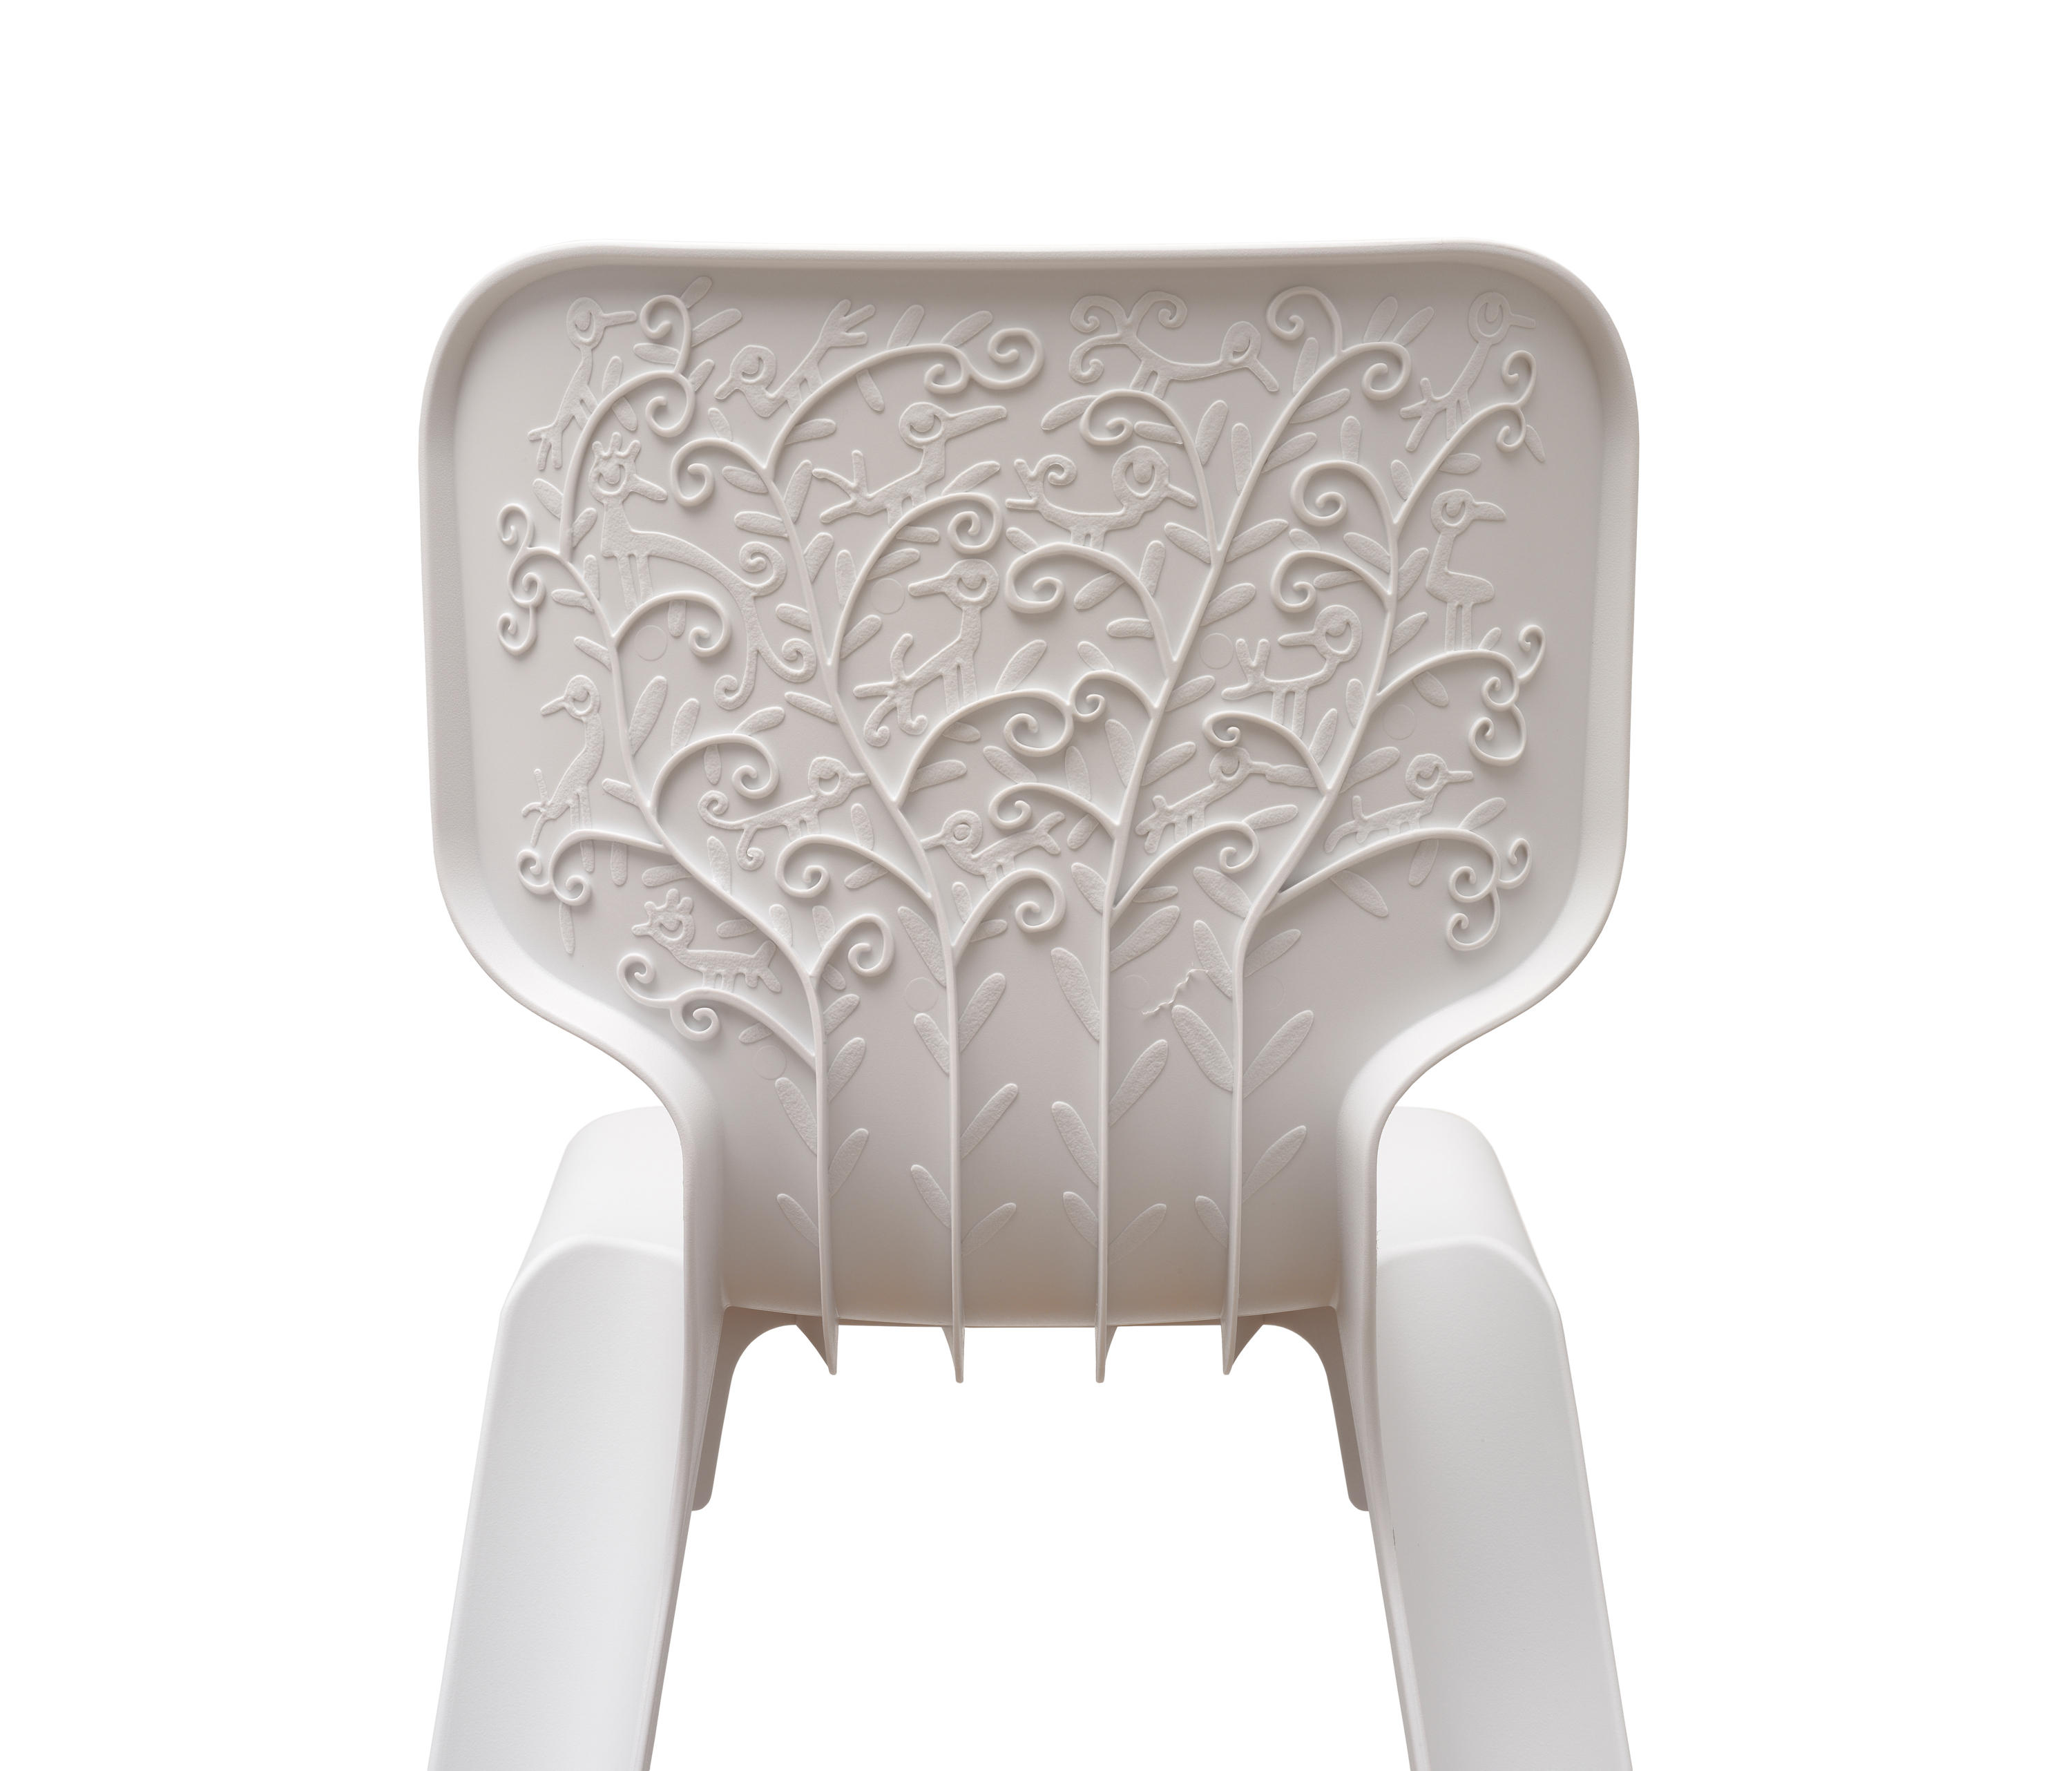 Alma Chair - High quality designer products | Architonic